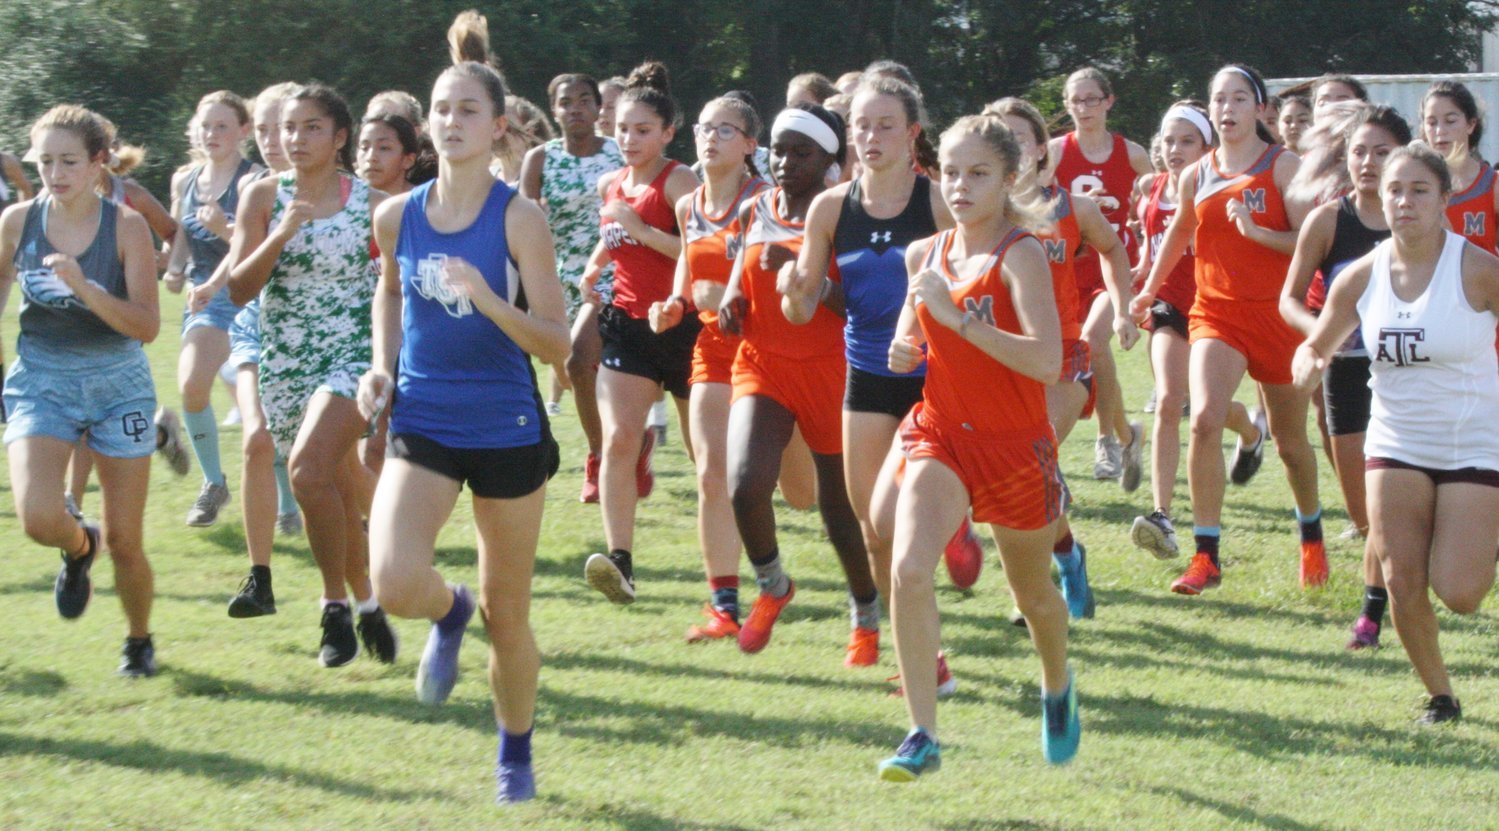 The start of the 1A-4A girls race captured determination and energy.